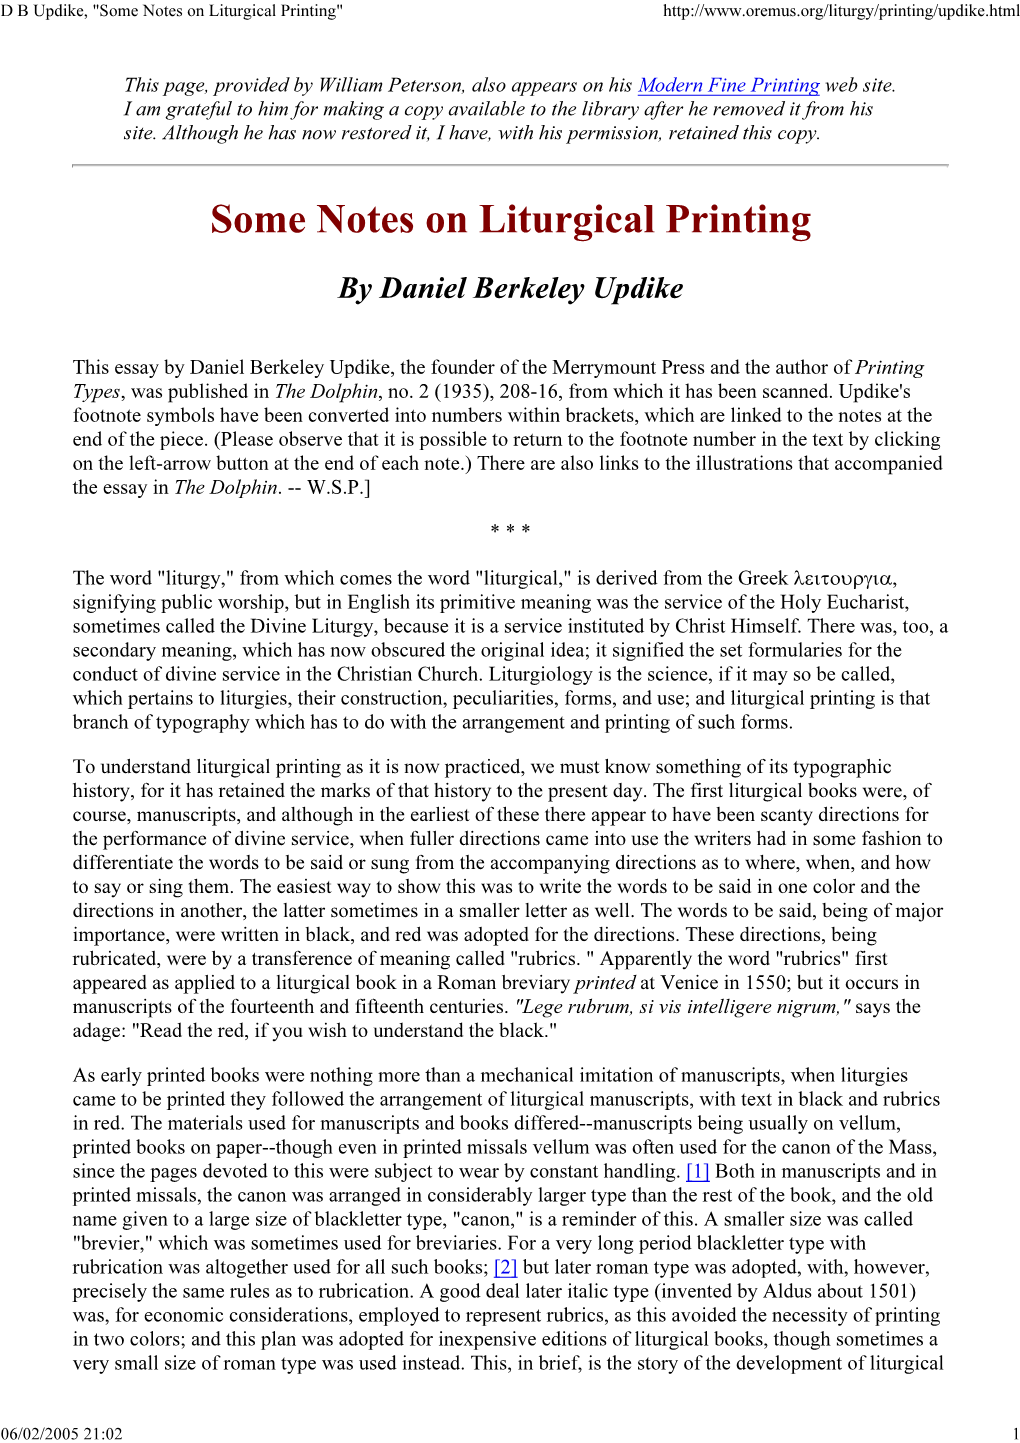 Some Notes on Liturgical Printing"